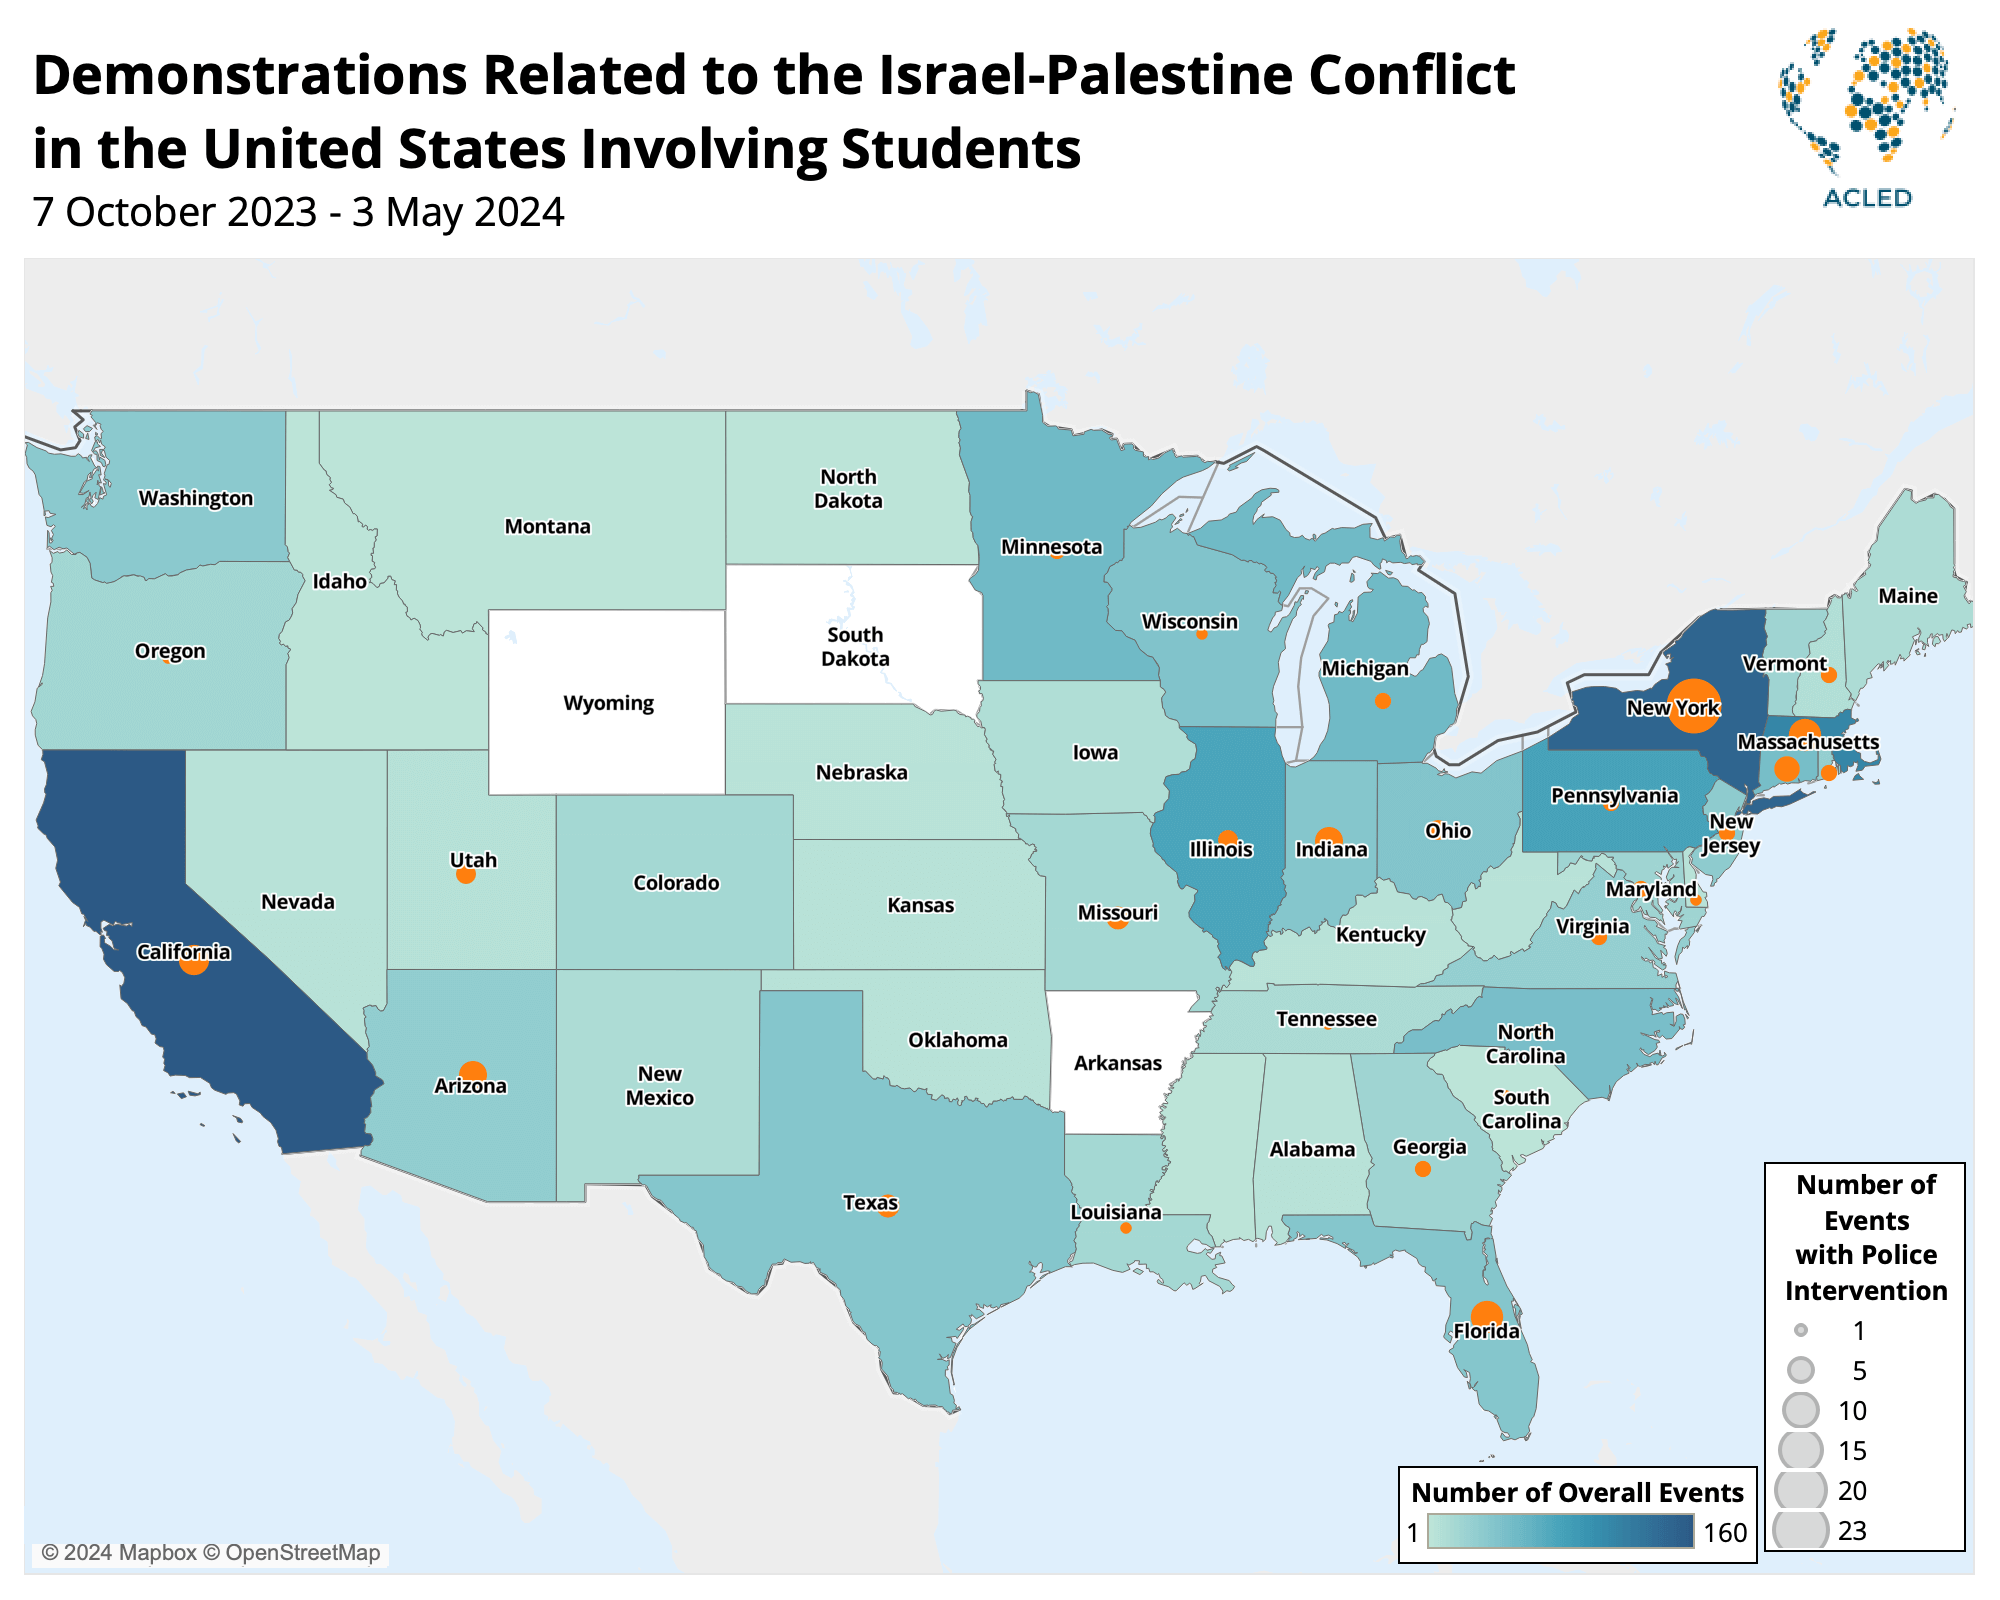 Map: Demonstrations related to the Israel-Palestine conflict in the US involving students